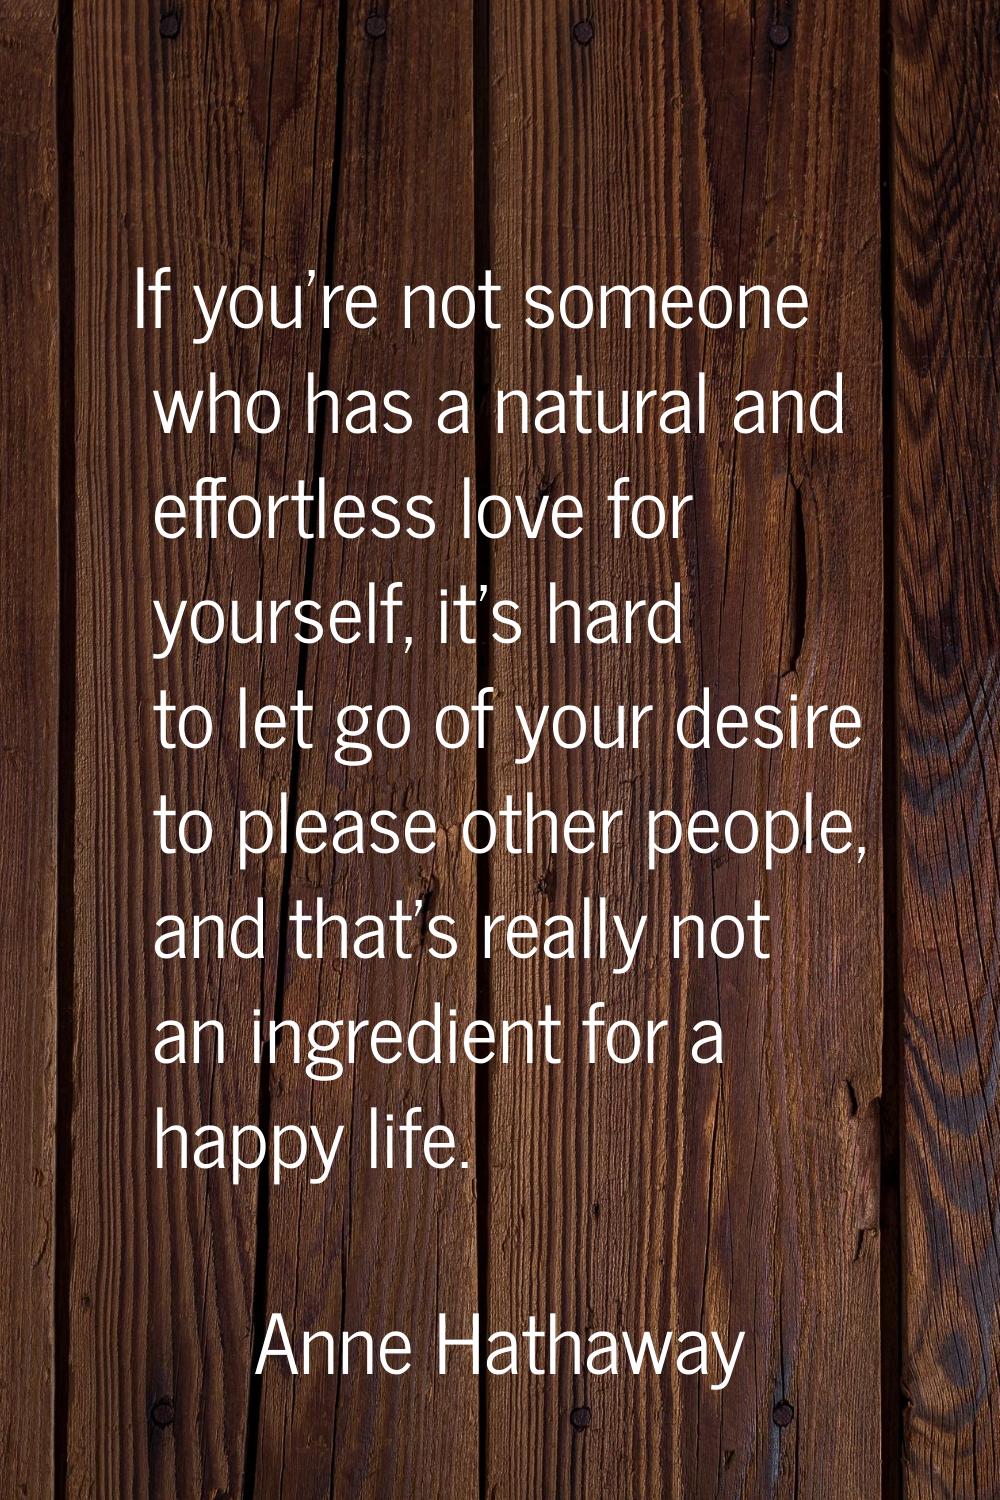 If you're not someone who has a natural and effortless love for yourself, it's hard to let go of yo